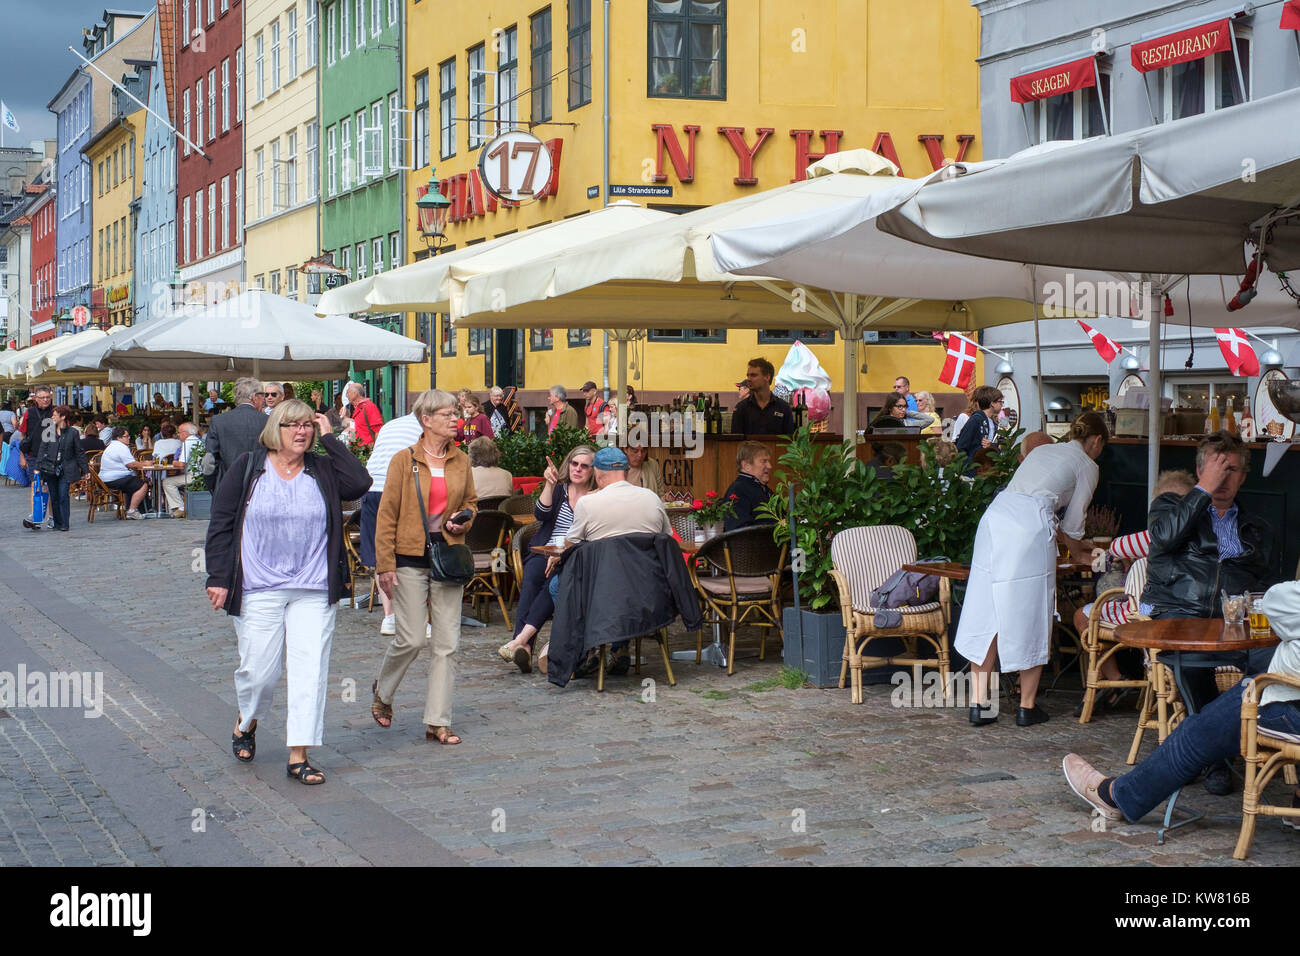 Restaurant at Nyhavn, a 17th century harbor district in the center of Copenhagen and currently a popular waterfront tourist attraction. Stock Photo